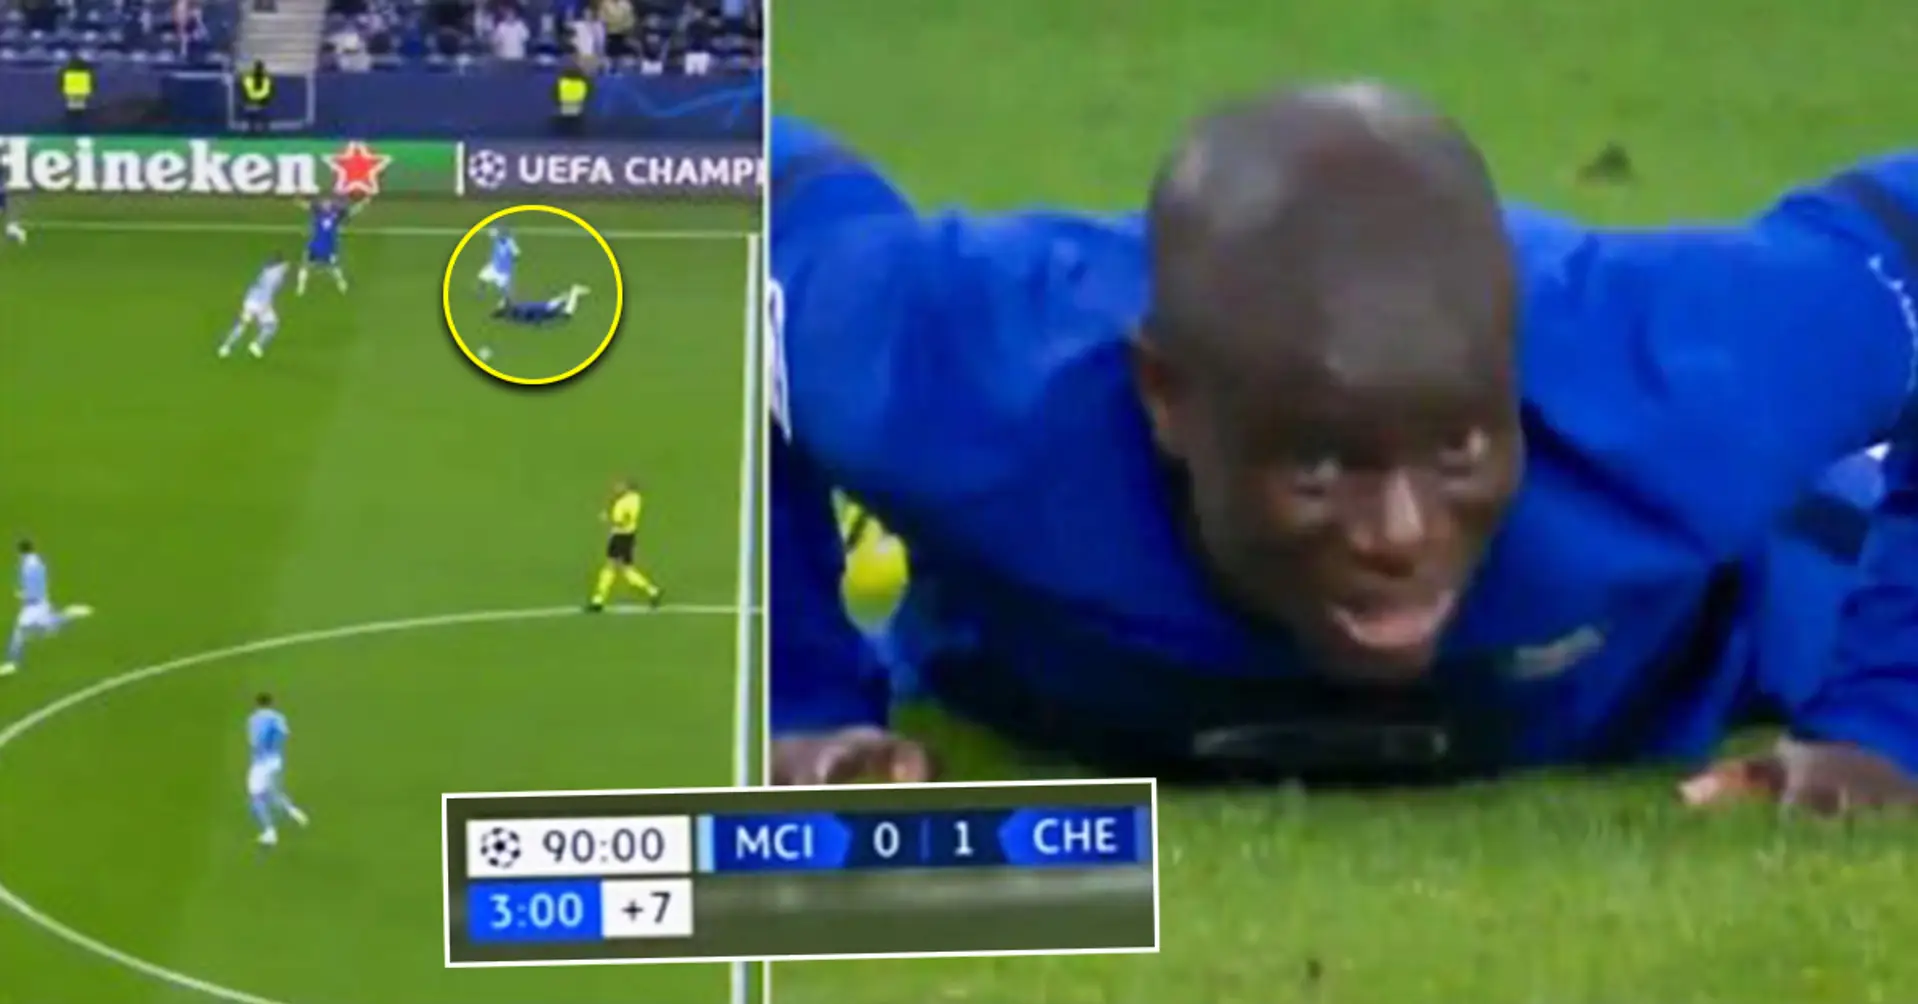 N’Golo Kante praised for one particular moment during last minutes of Champions League final